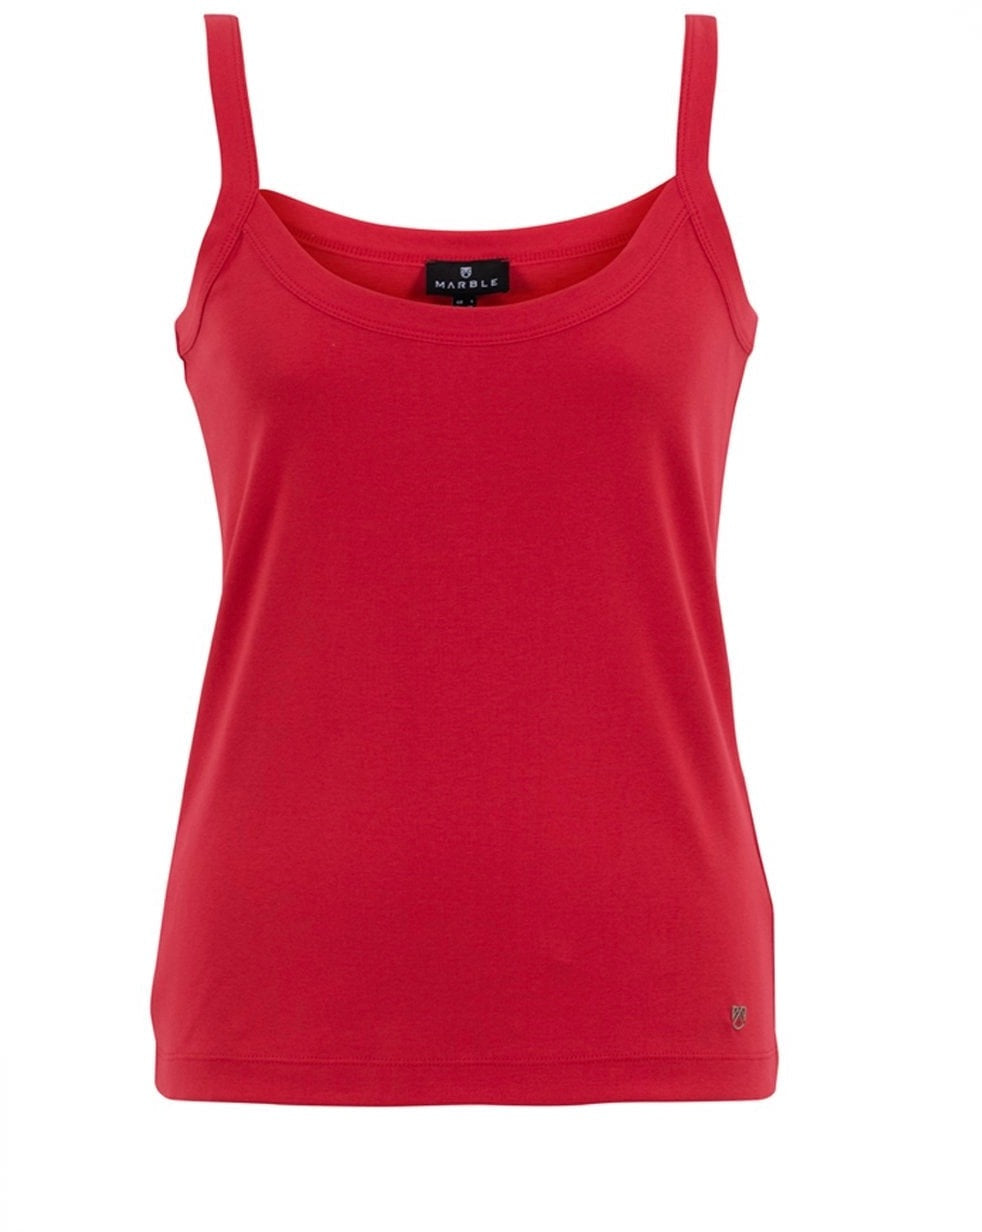 COTTON CAMISOLE - RED